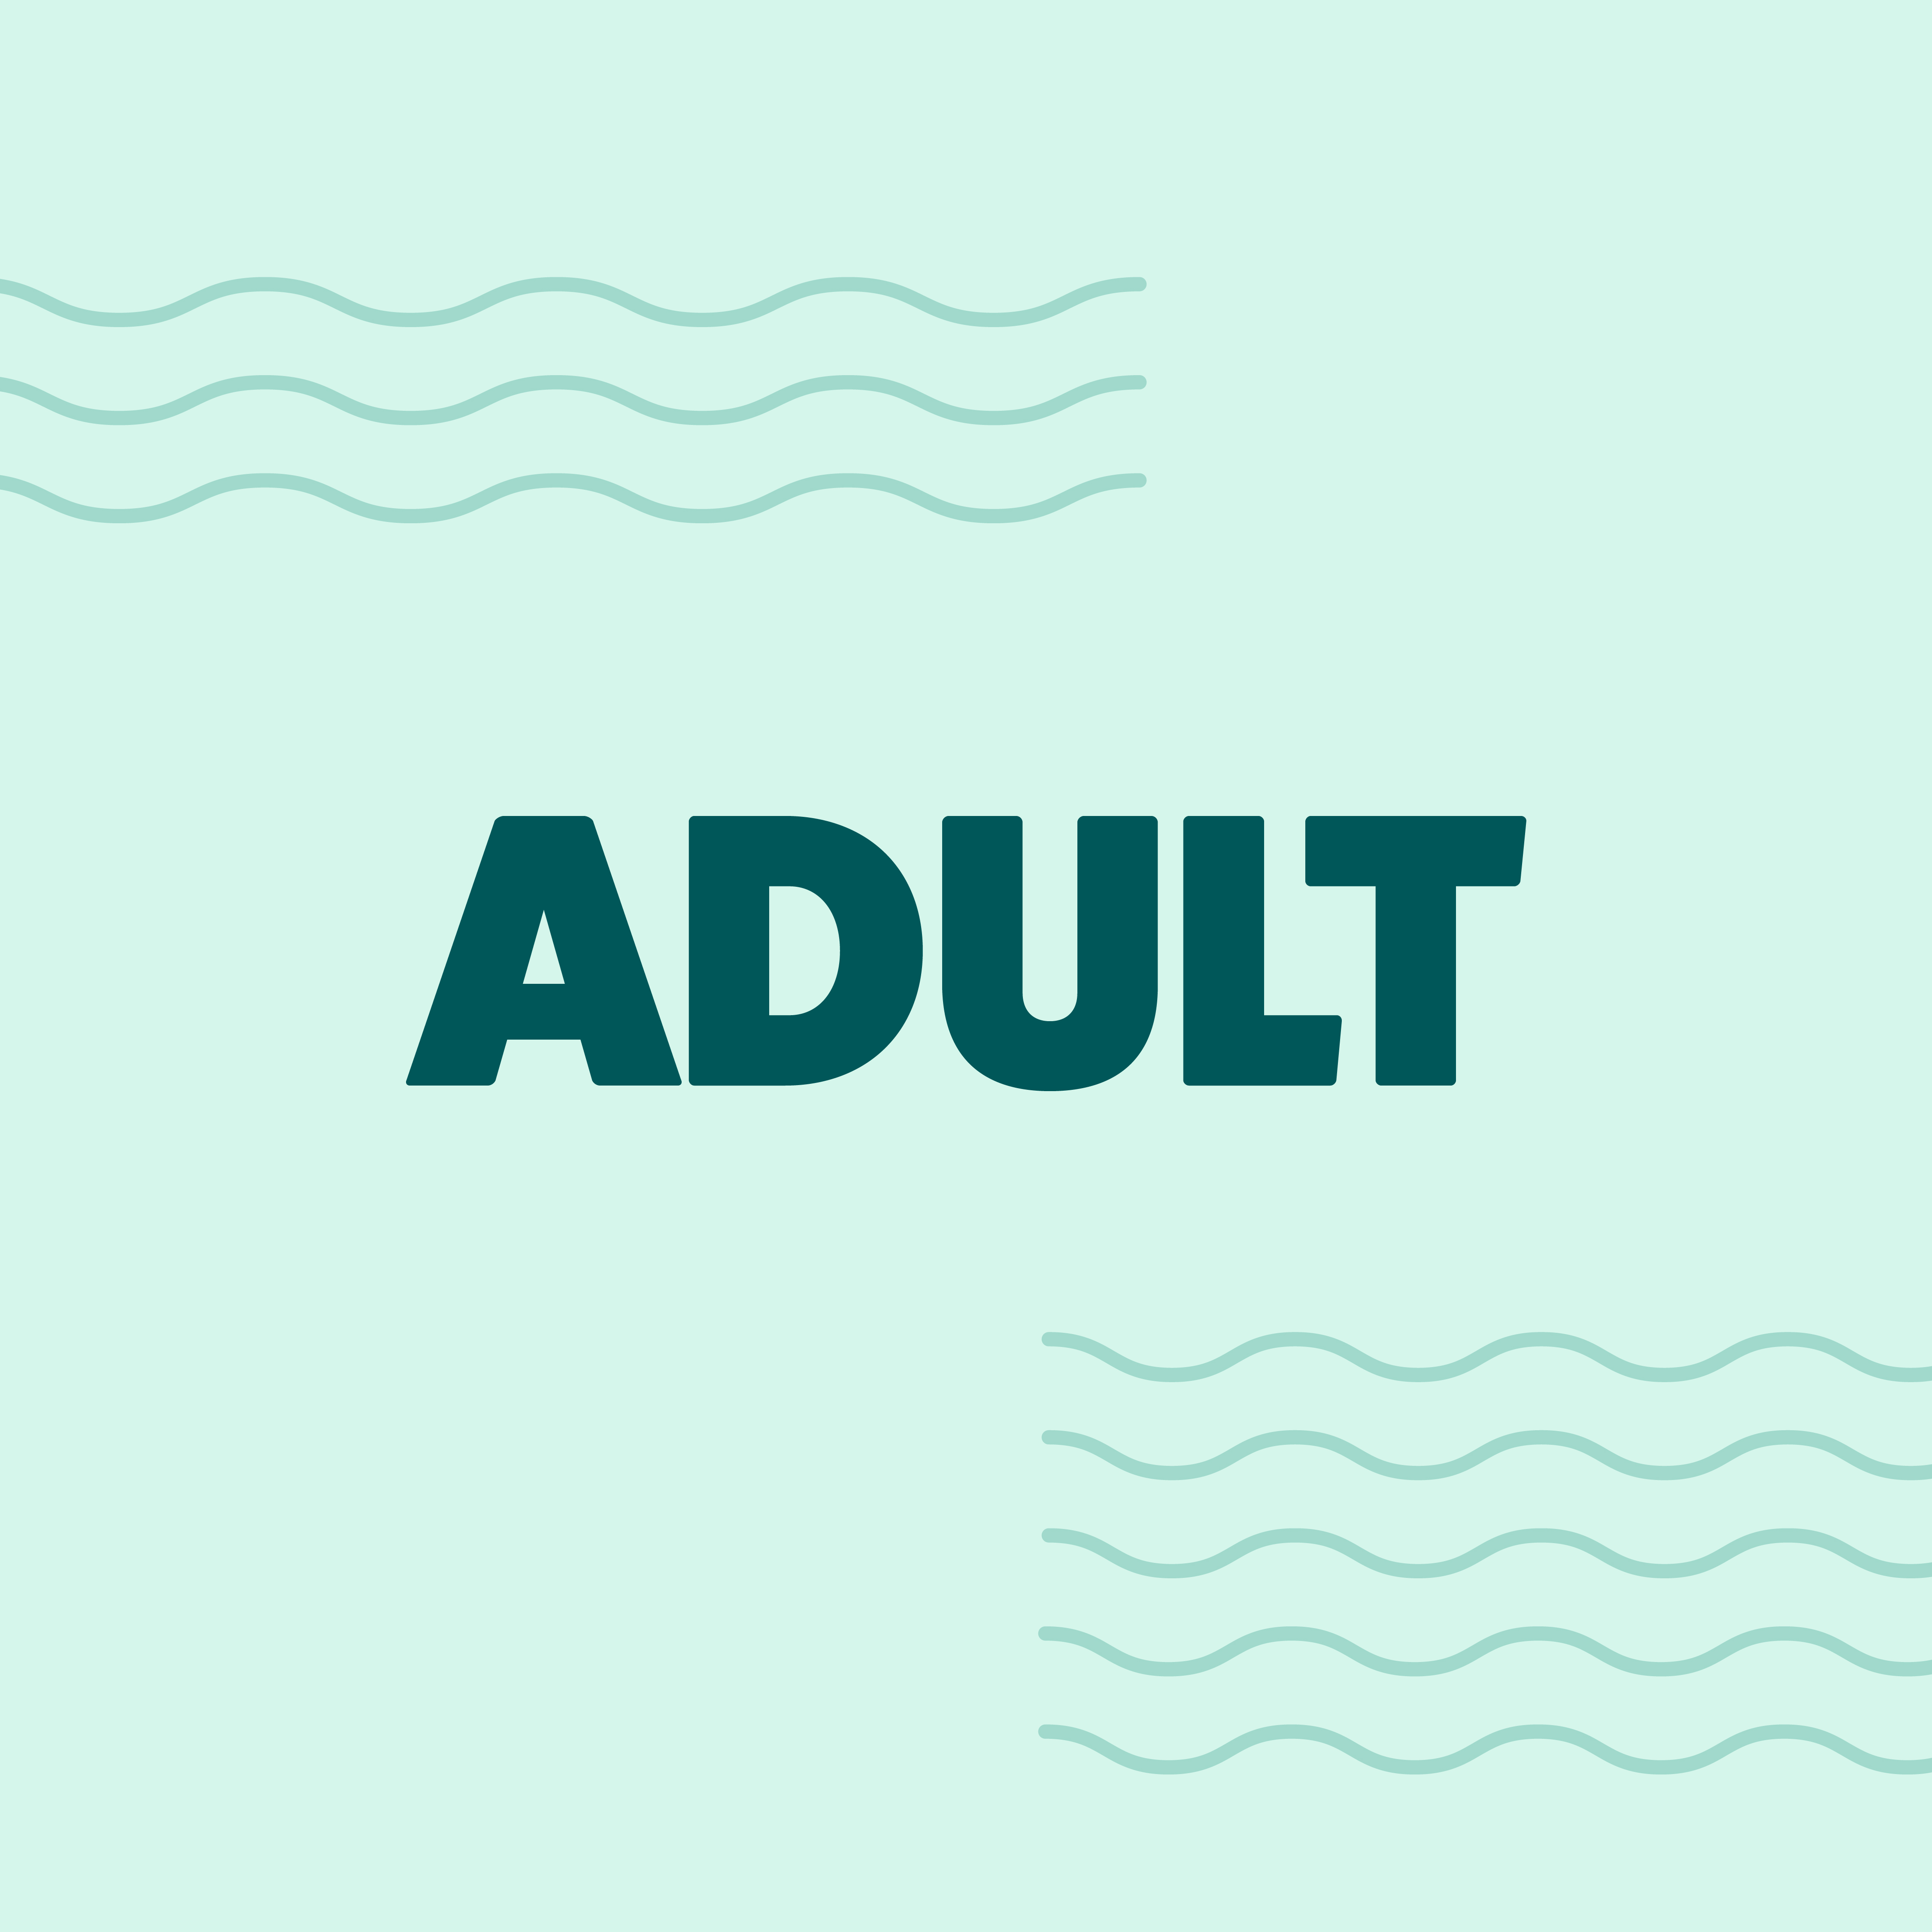 Light blue square with waves and text "Adult"